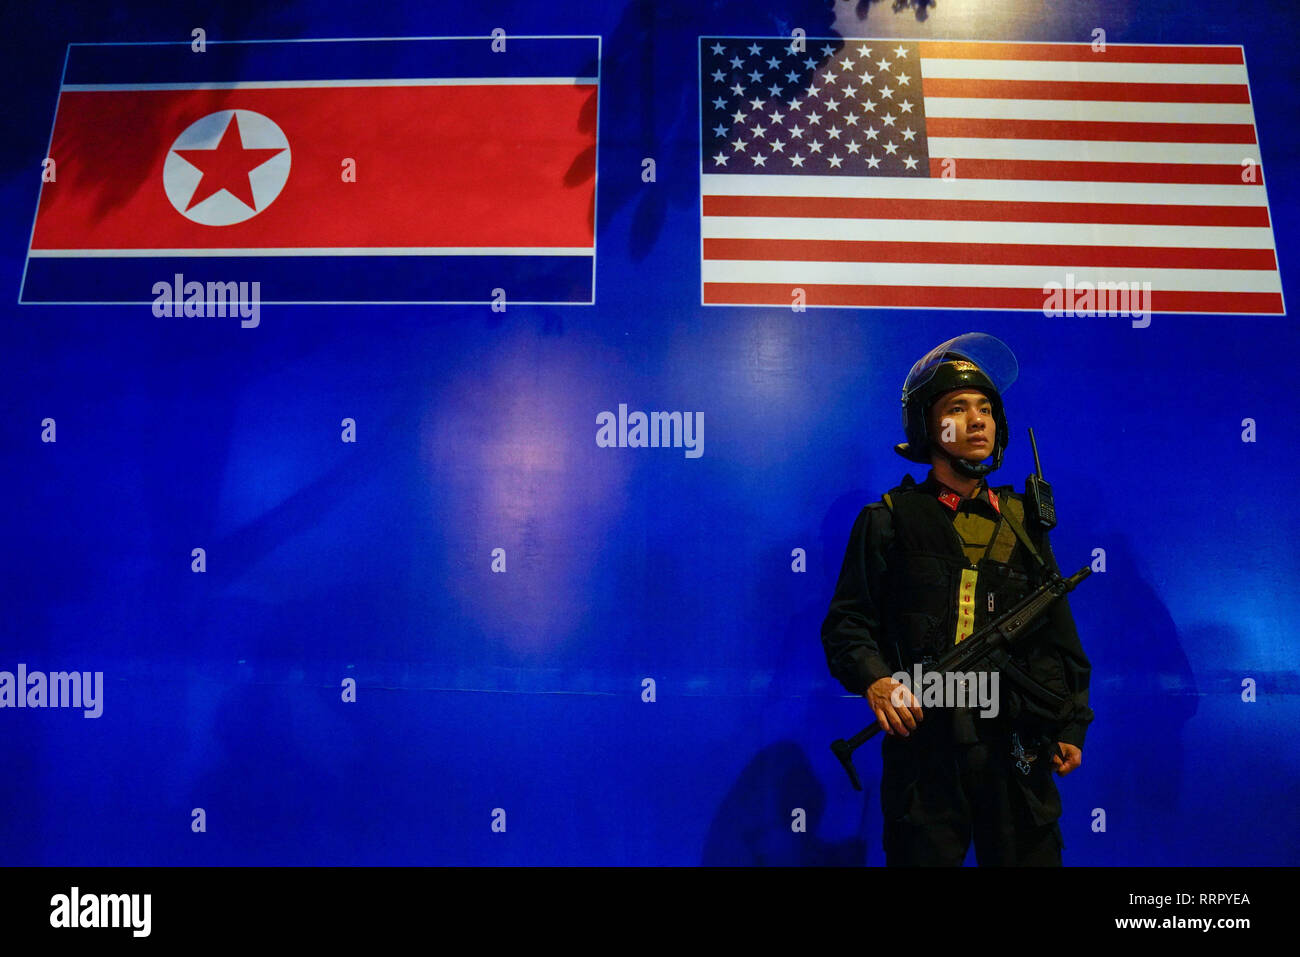 Hanoi, Vietnam. 27th Feb, 2019. A armed police officer stands guard in front of the DPRK-USA Hanoi Summit sign board ahead of the Trump Kim two-day summit from February 27-28. Credit: Christopher Jue/ZUMA Wire/Alamy Live News Stock Photo